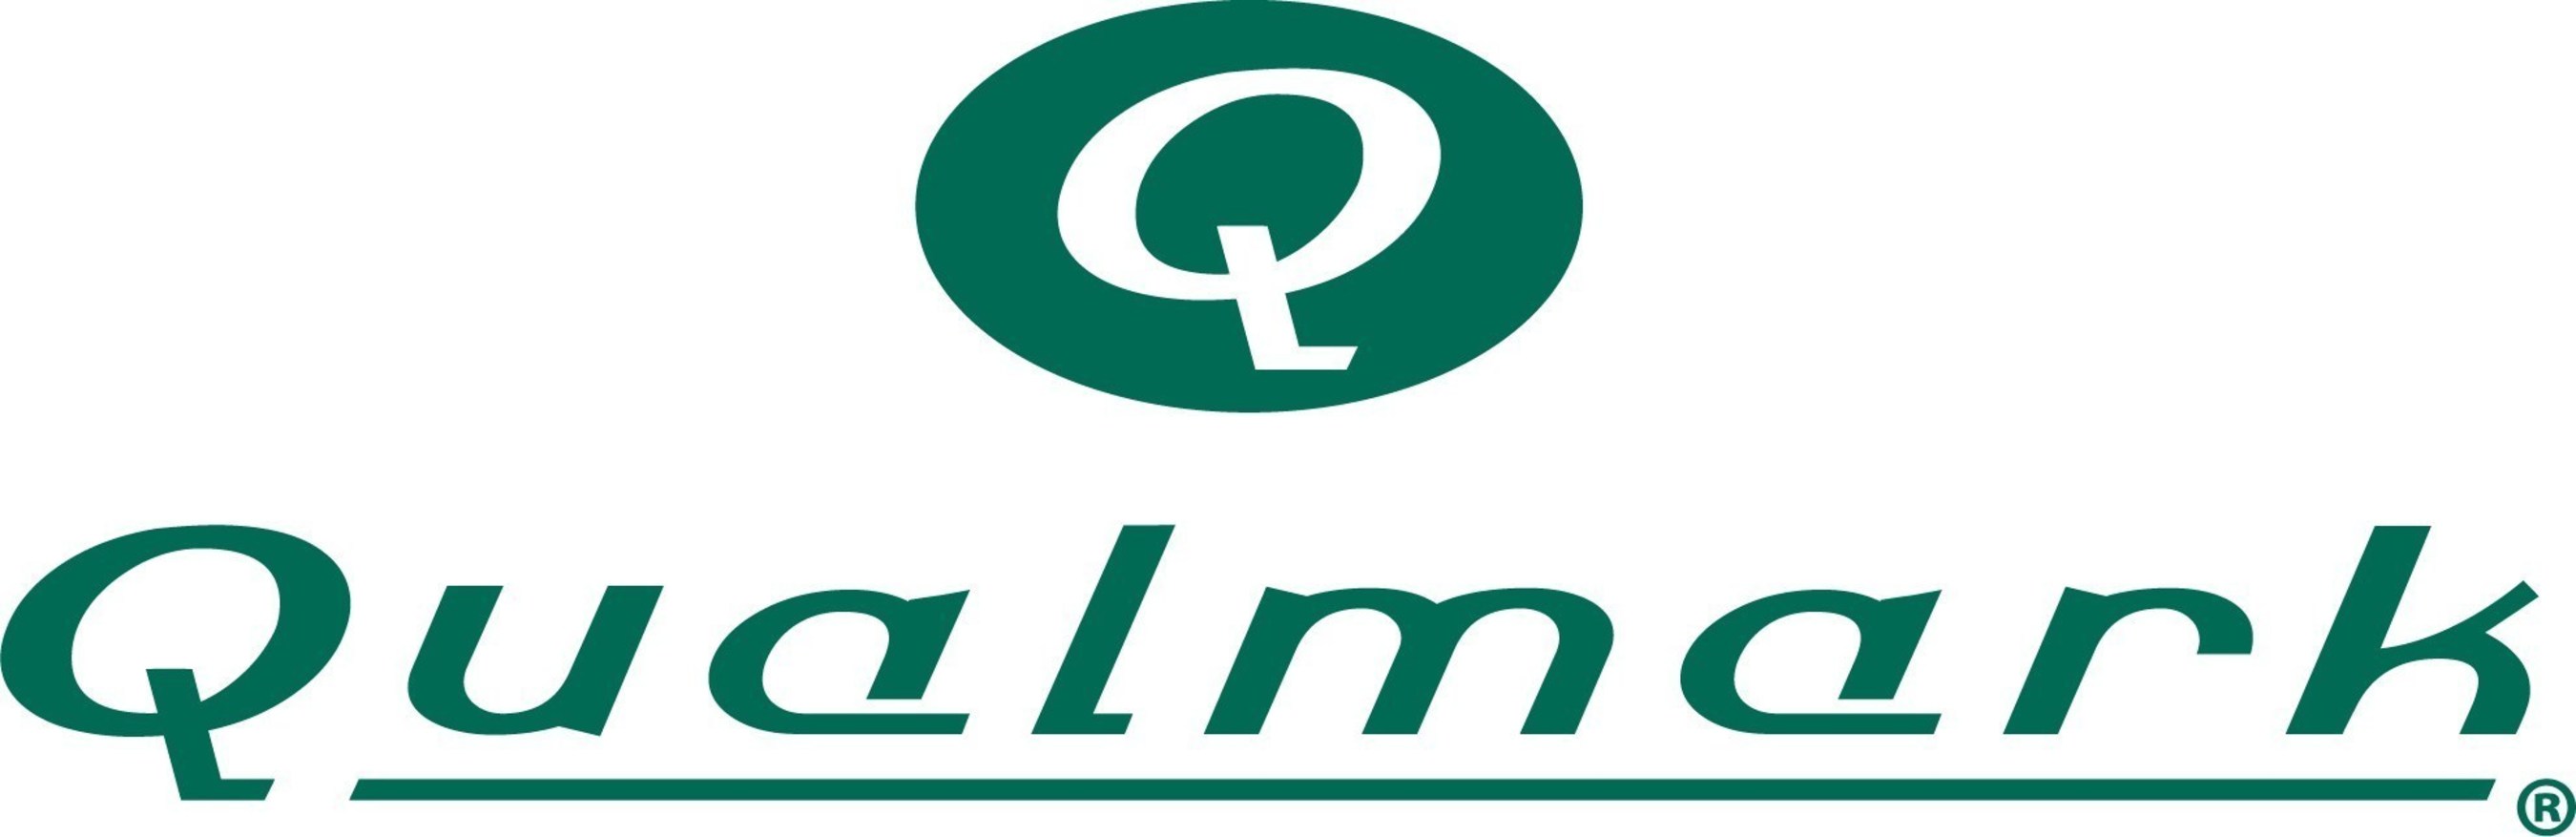 Qualmark Corporation has been one of the leading manufacturers of accelerated reliability test equipment worldwide since pioneering the technology in the early 1990s. The company is now a wholly owned and independently operated subsidiary of ESPEC Corporation.